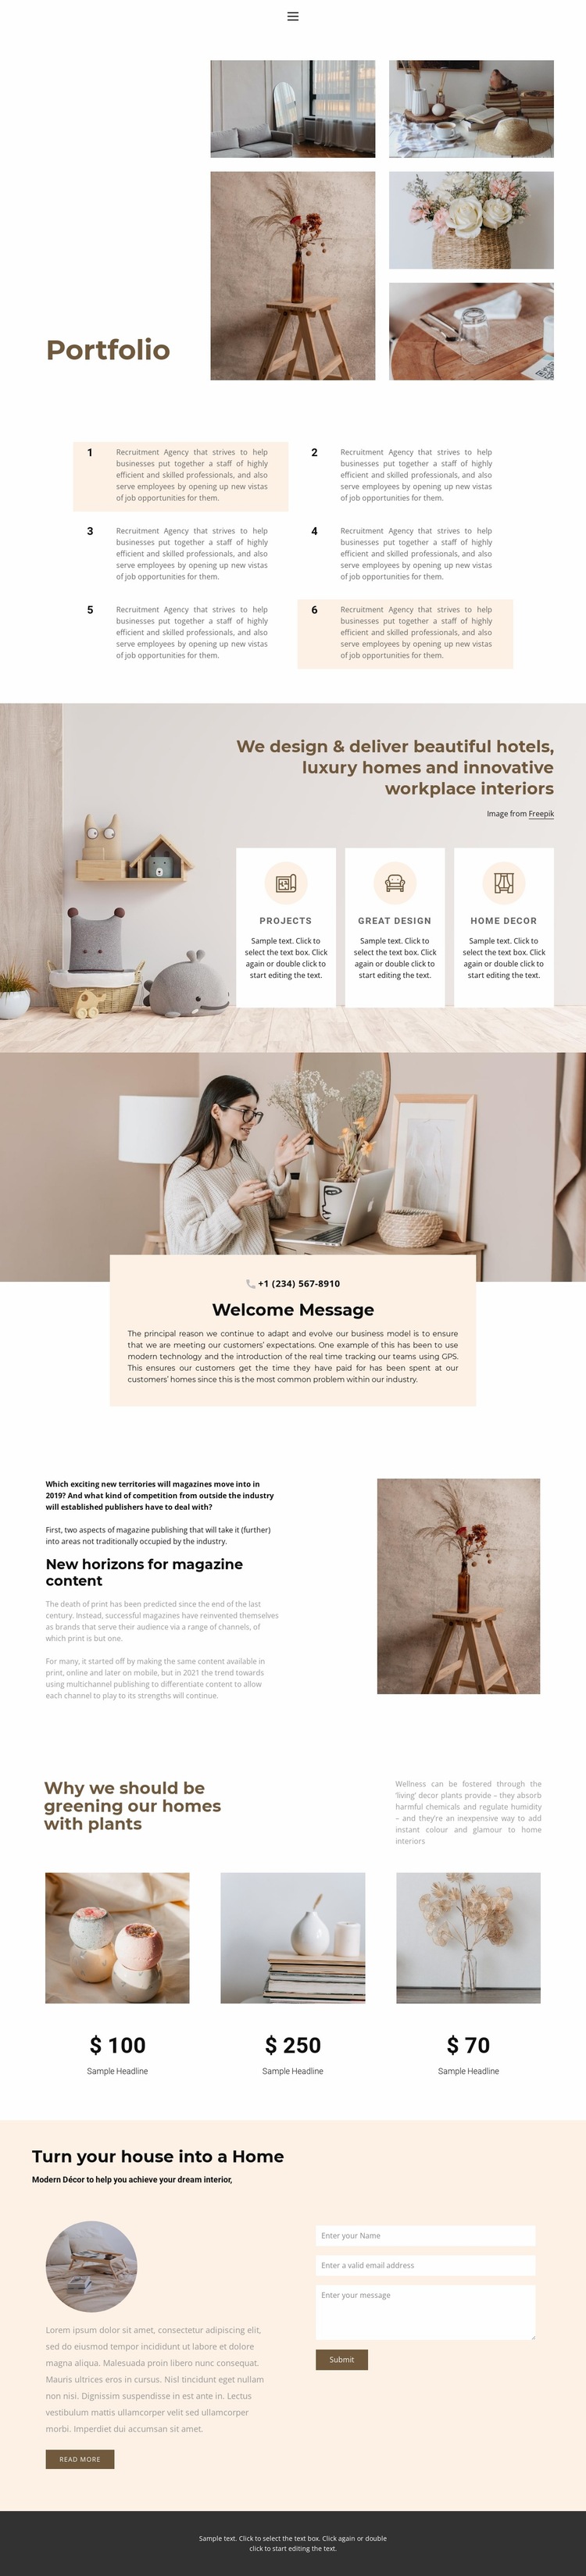 Decorate your home Website Builder Templates